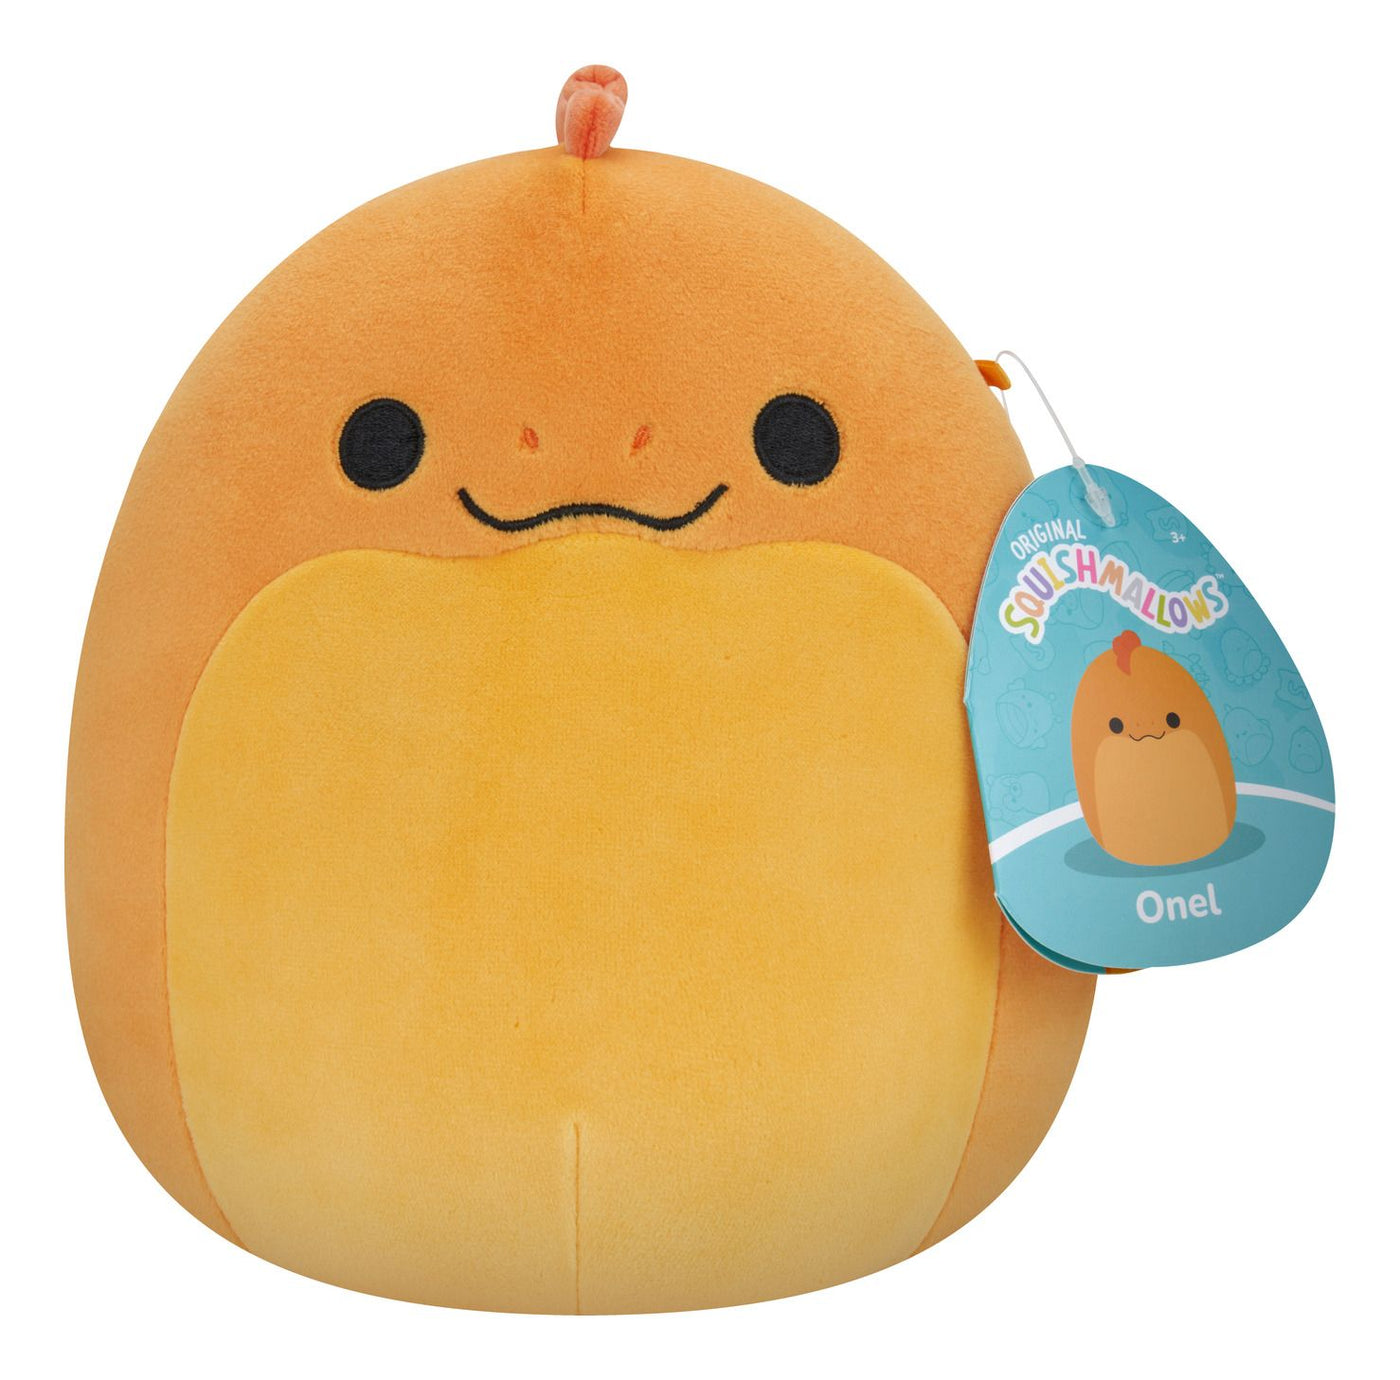 Squishmallows 7.5" Phase 16 Plush Toy - Onel